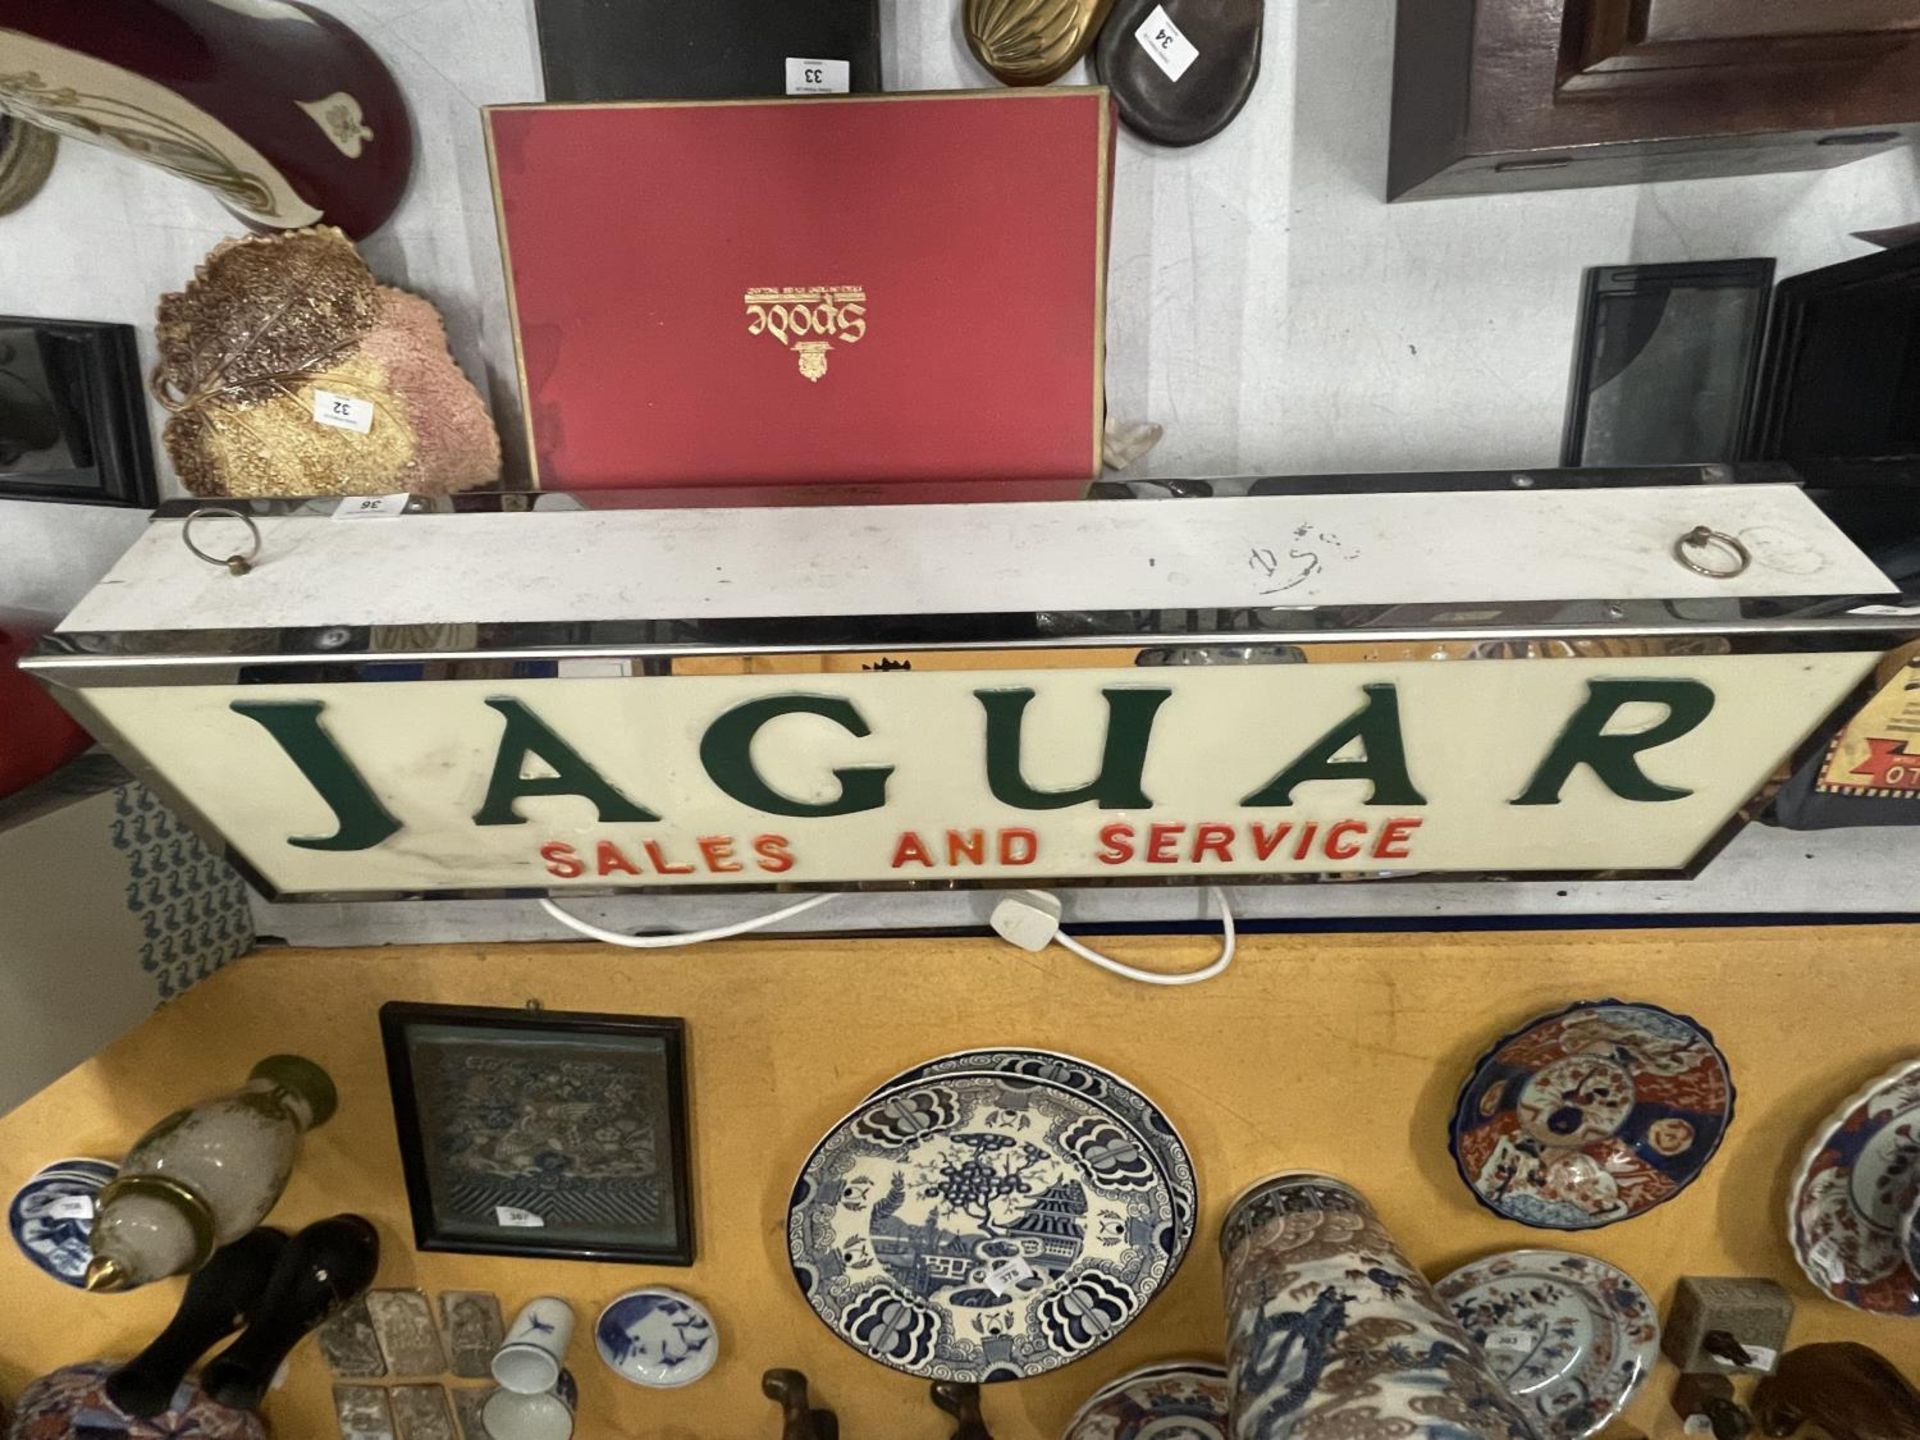 A DOUBLE SIDED JAGUAR SALES AND SERVICE ILLUMINATED LIGHT BOX SIGN - Image 6 of 6